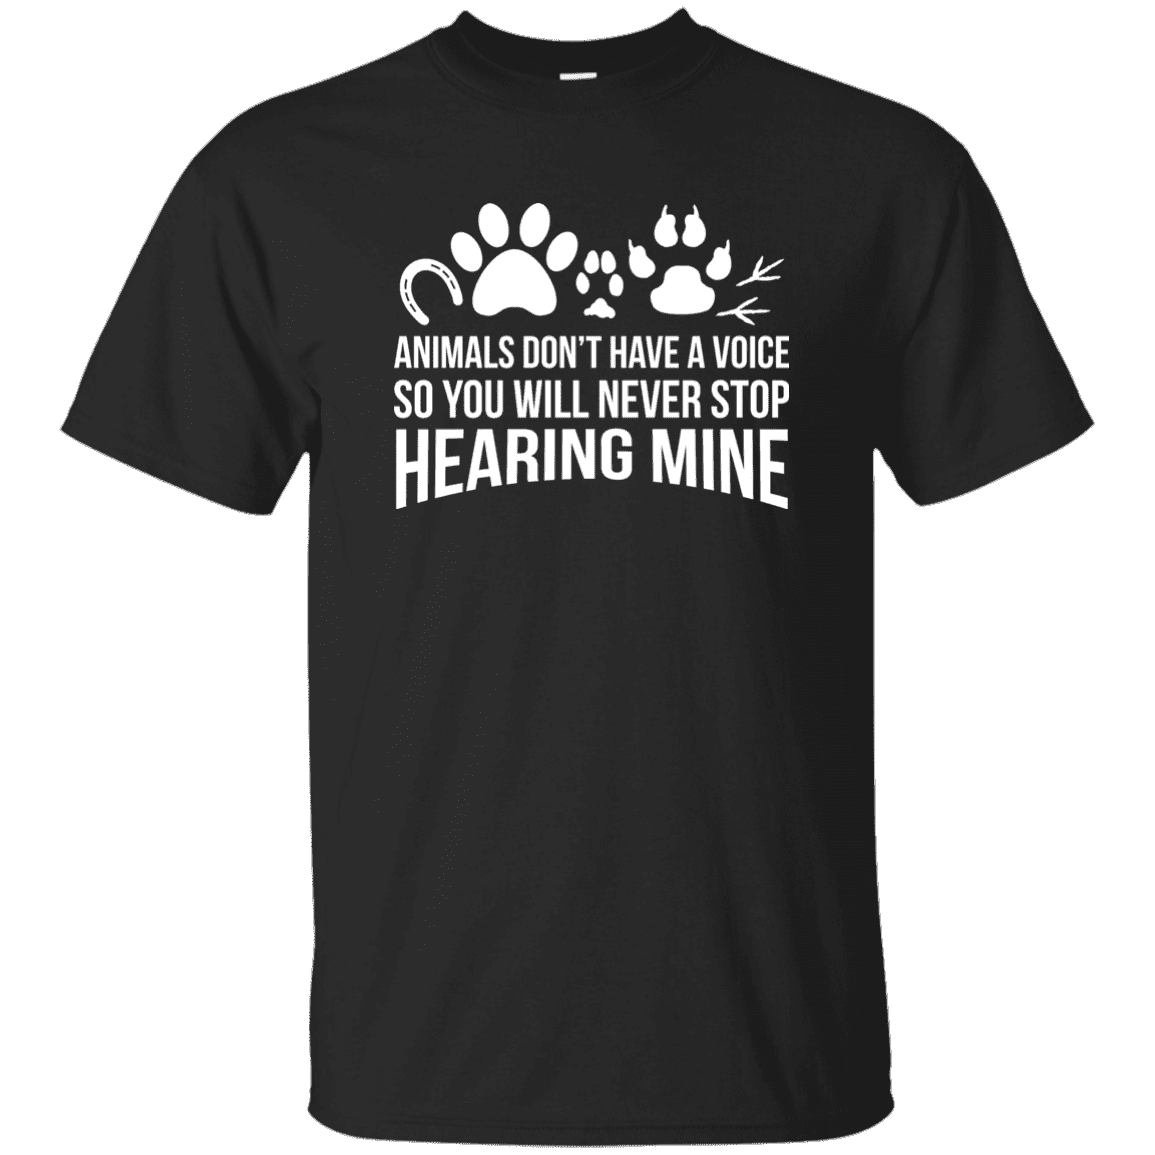 Animals Don't Have A Voice - T Shirt.